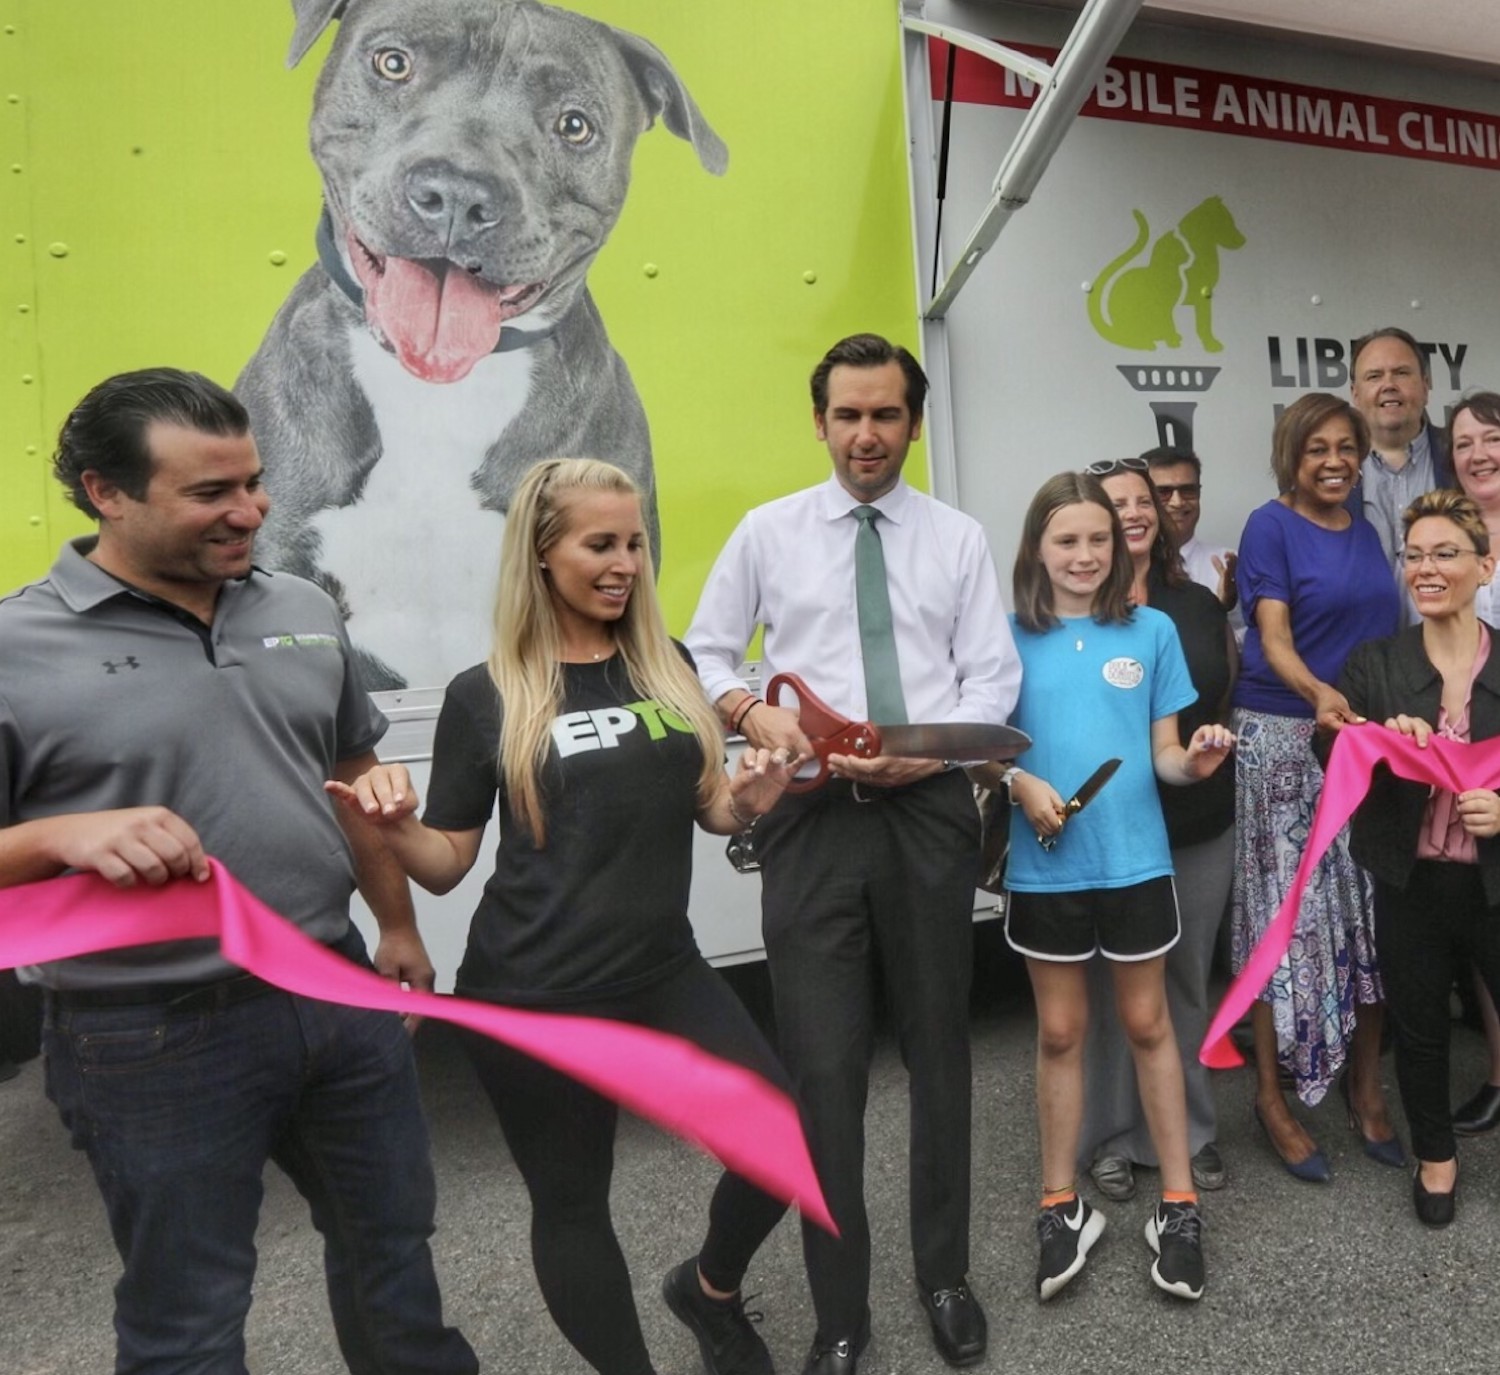 Ribbon Cutting for spay/neuter surgical van for Liberty Humane Society, initially funded by EPTG fundraiser.